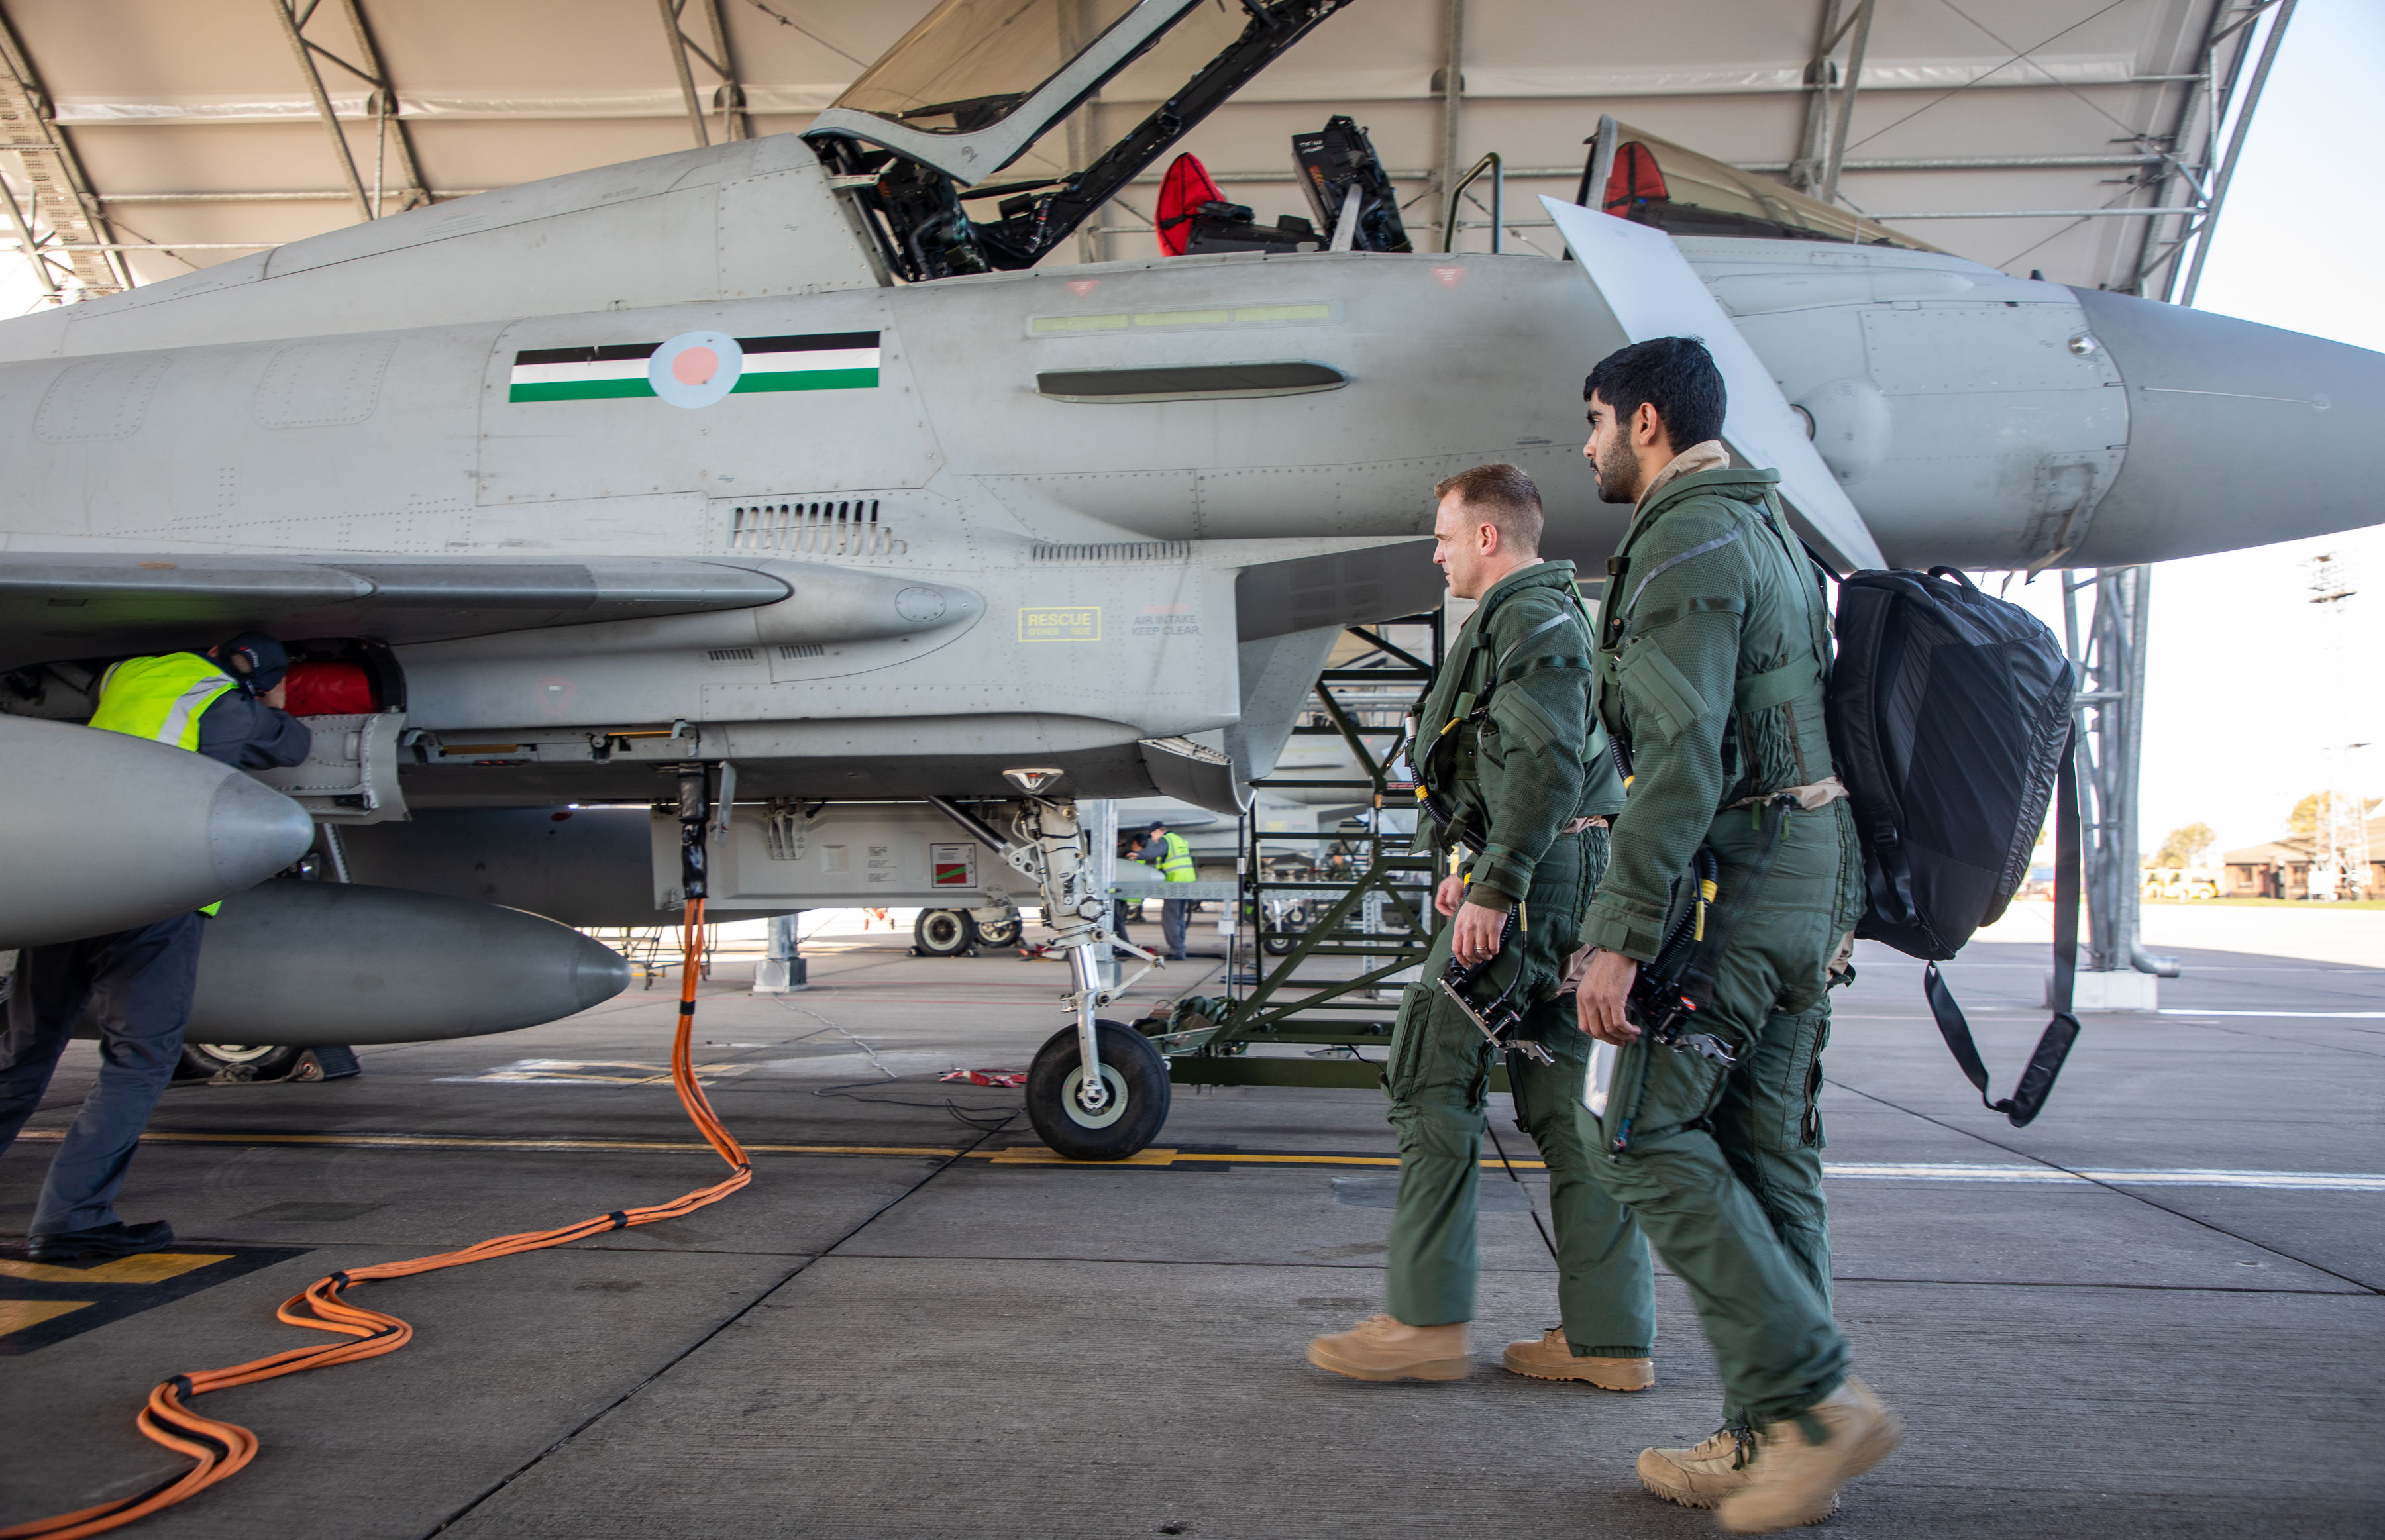 Image shows RAF aviators on airfield with fighter jets.